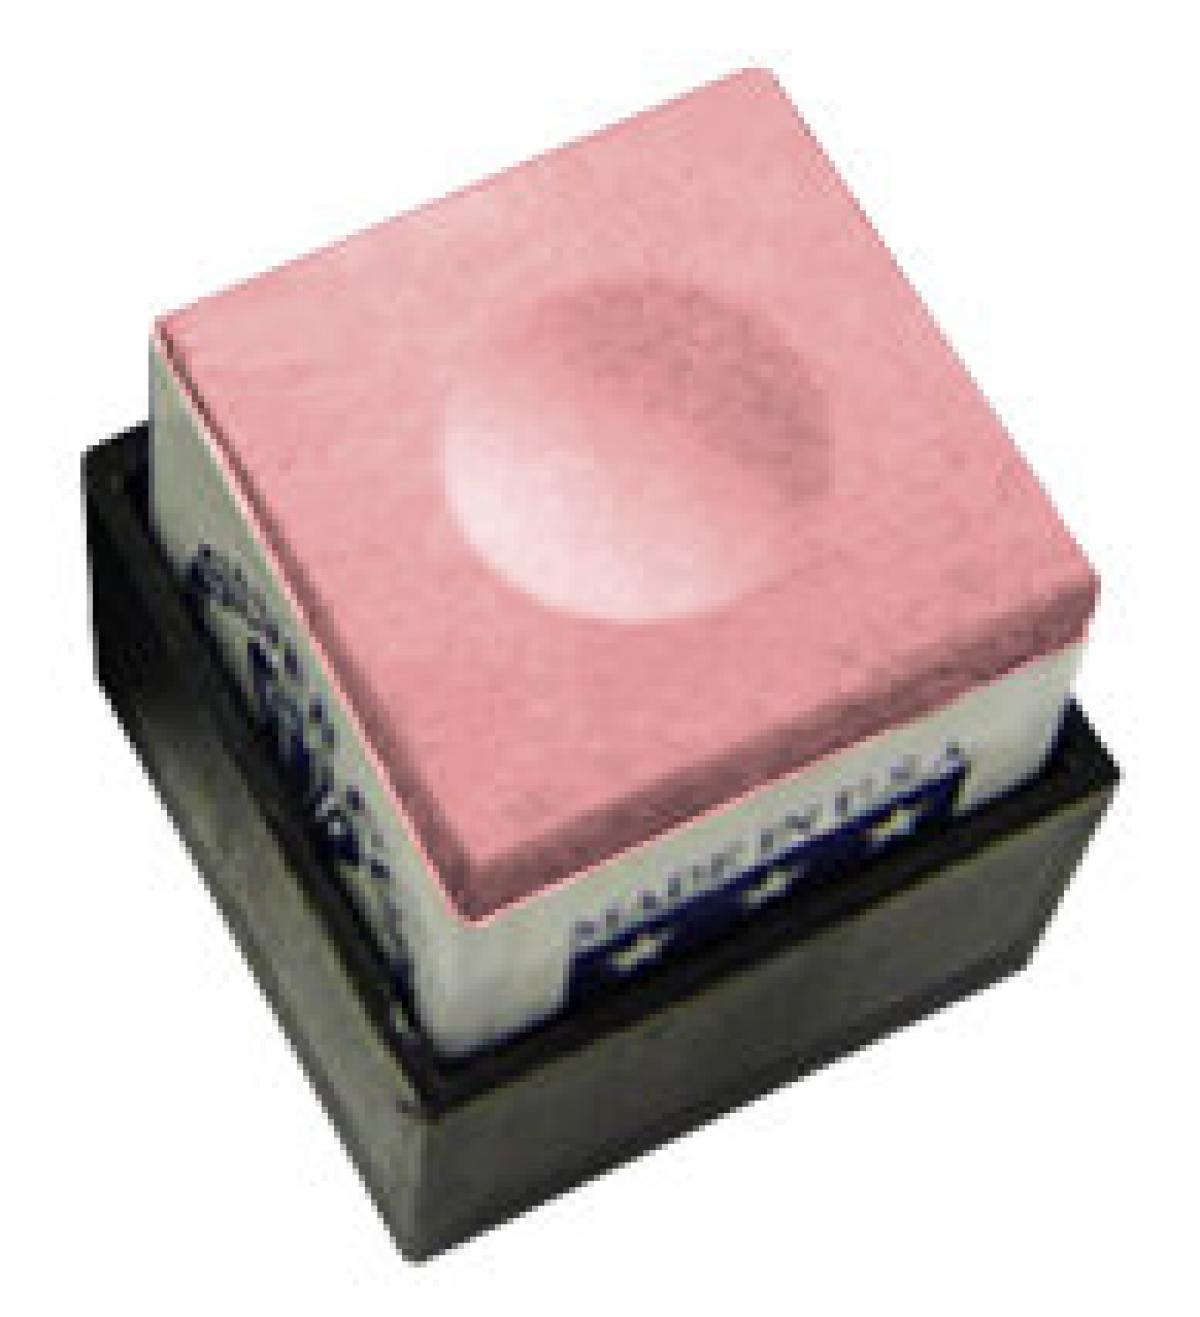 Silver Cup Chalk (pink, single cube)